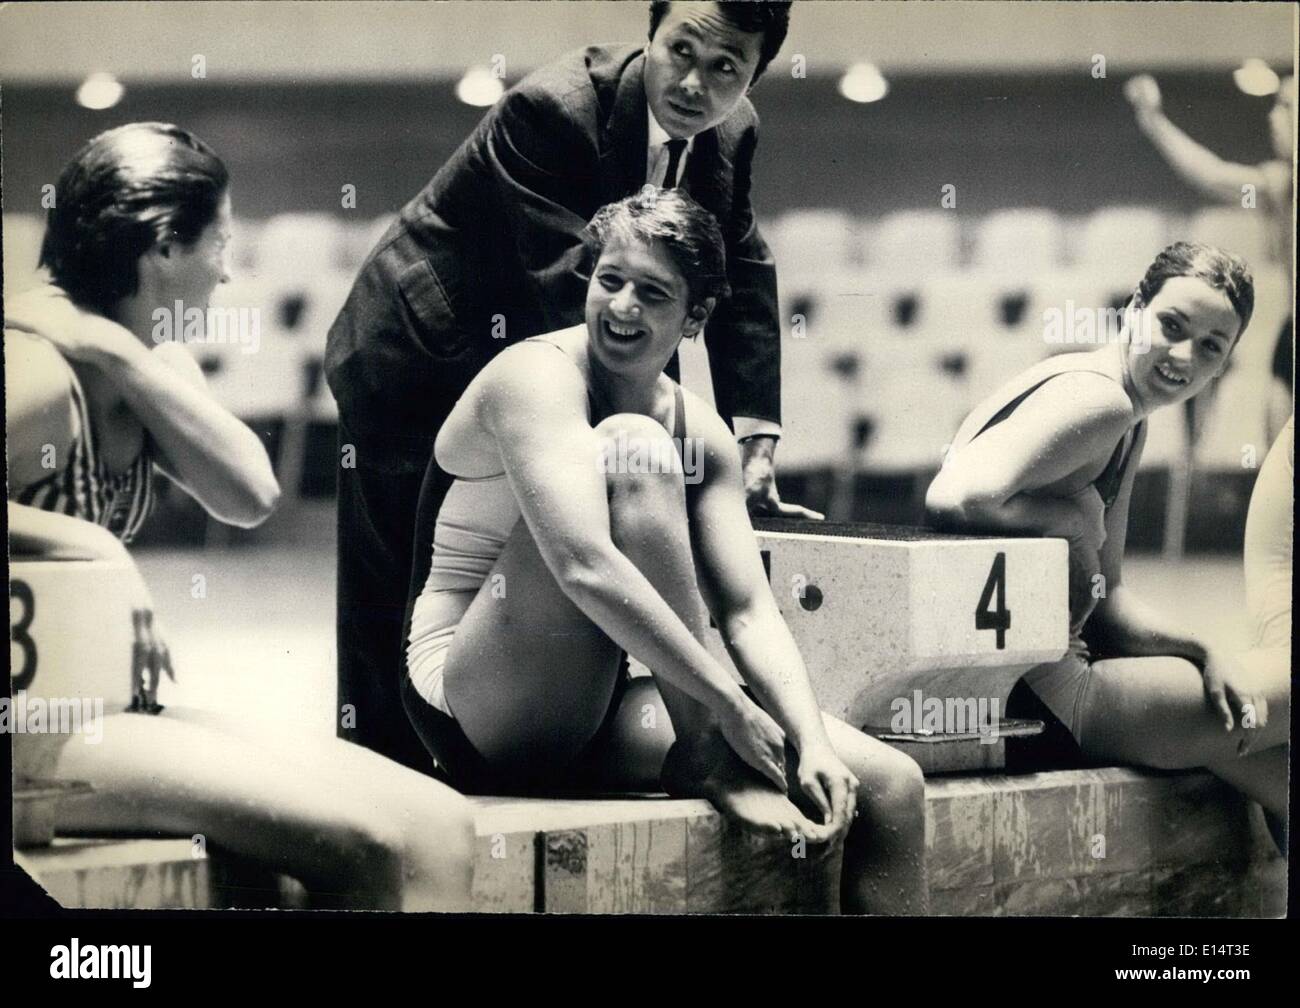 Apr. 18, 2012 - Tokyo Olympics: Dawn Fraser, chats with one of her team mates at the Olympic Pool. The Australian swimmer looks Stock Photo